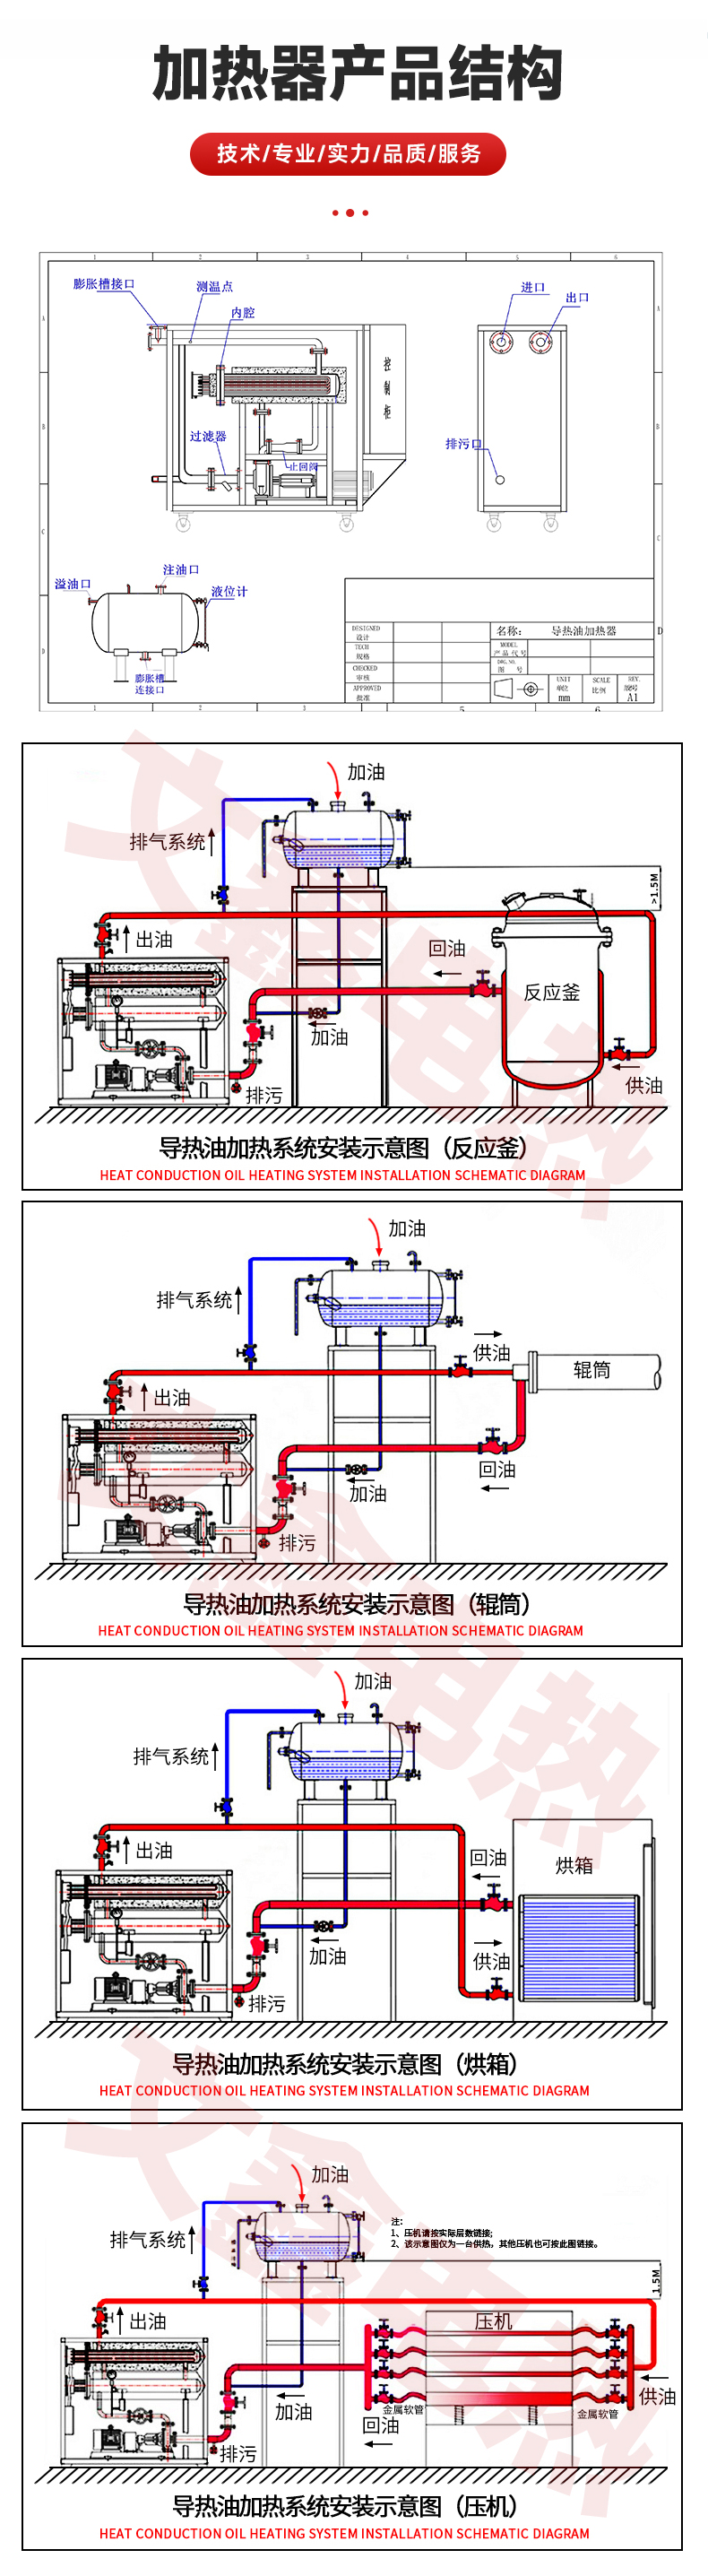 Electric heating thermal oil furnace, reaction kettle, wooden plate, oil boiler, thermal oil heater equipment, environmentally friendly electric boiler